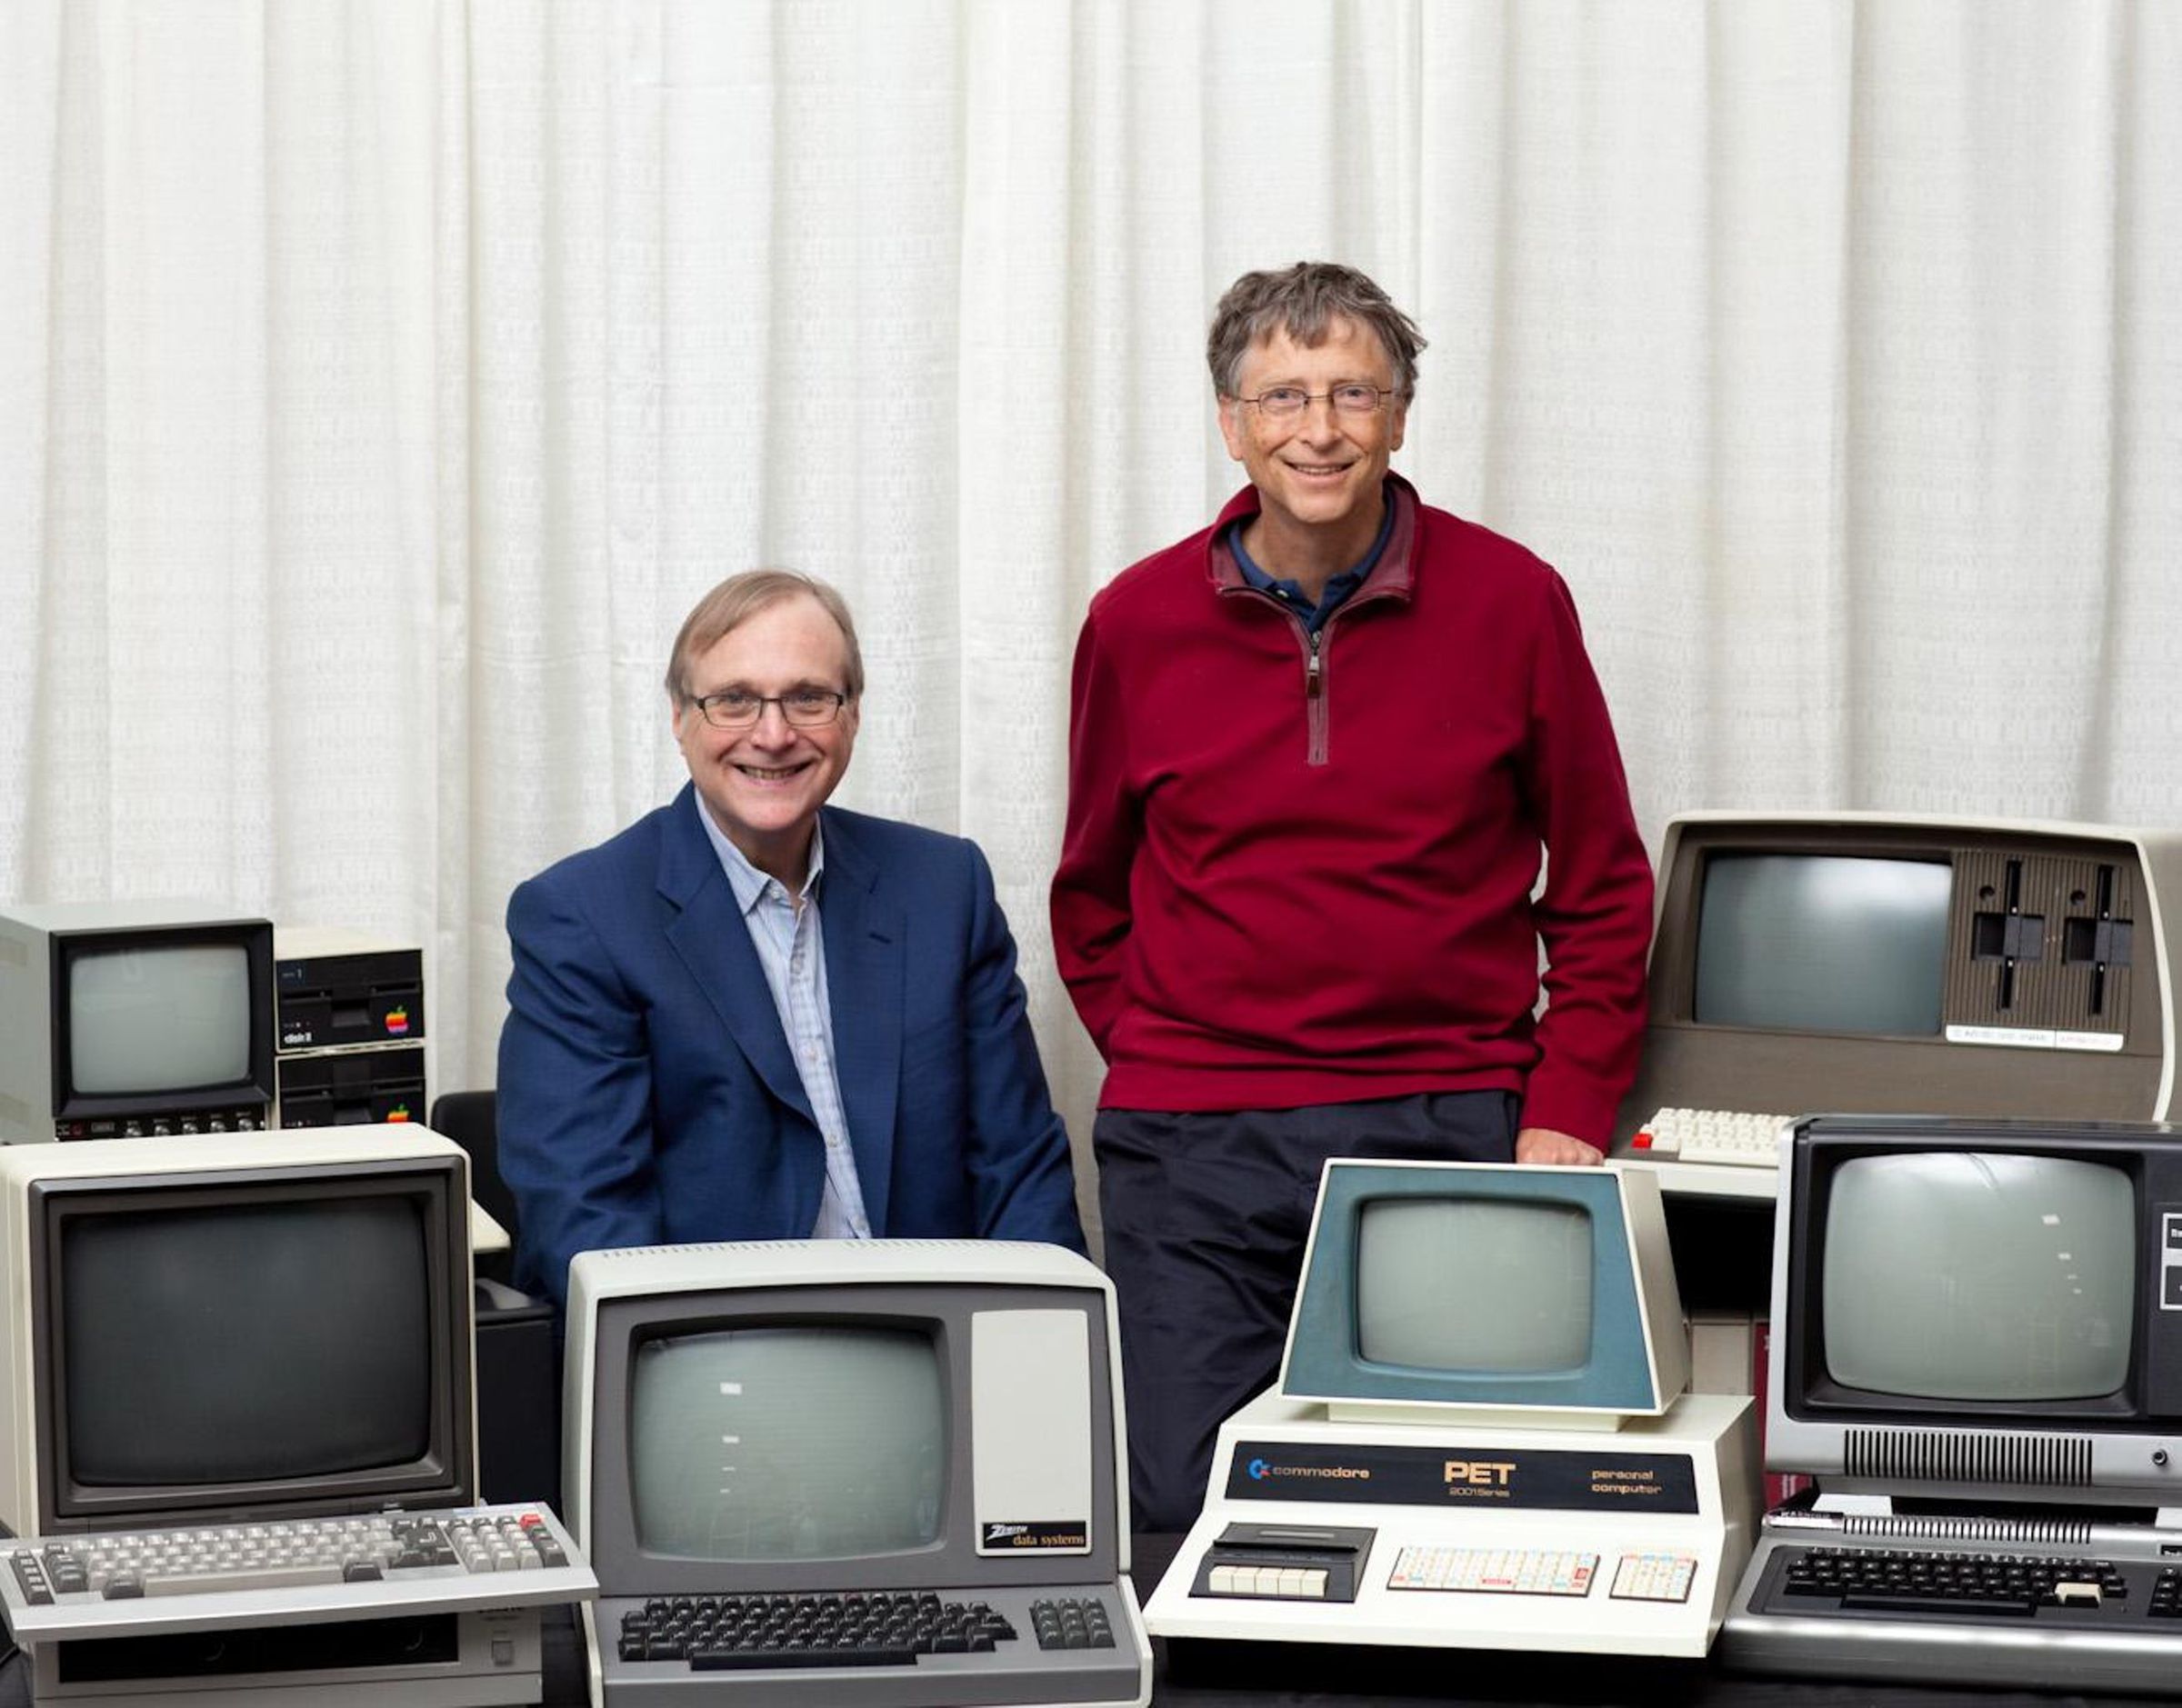 Paul Allen and Bill Gates re-create famous 1982 photo.